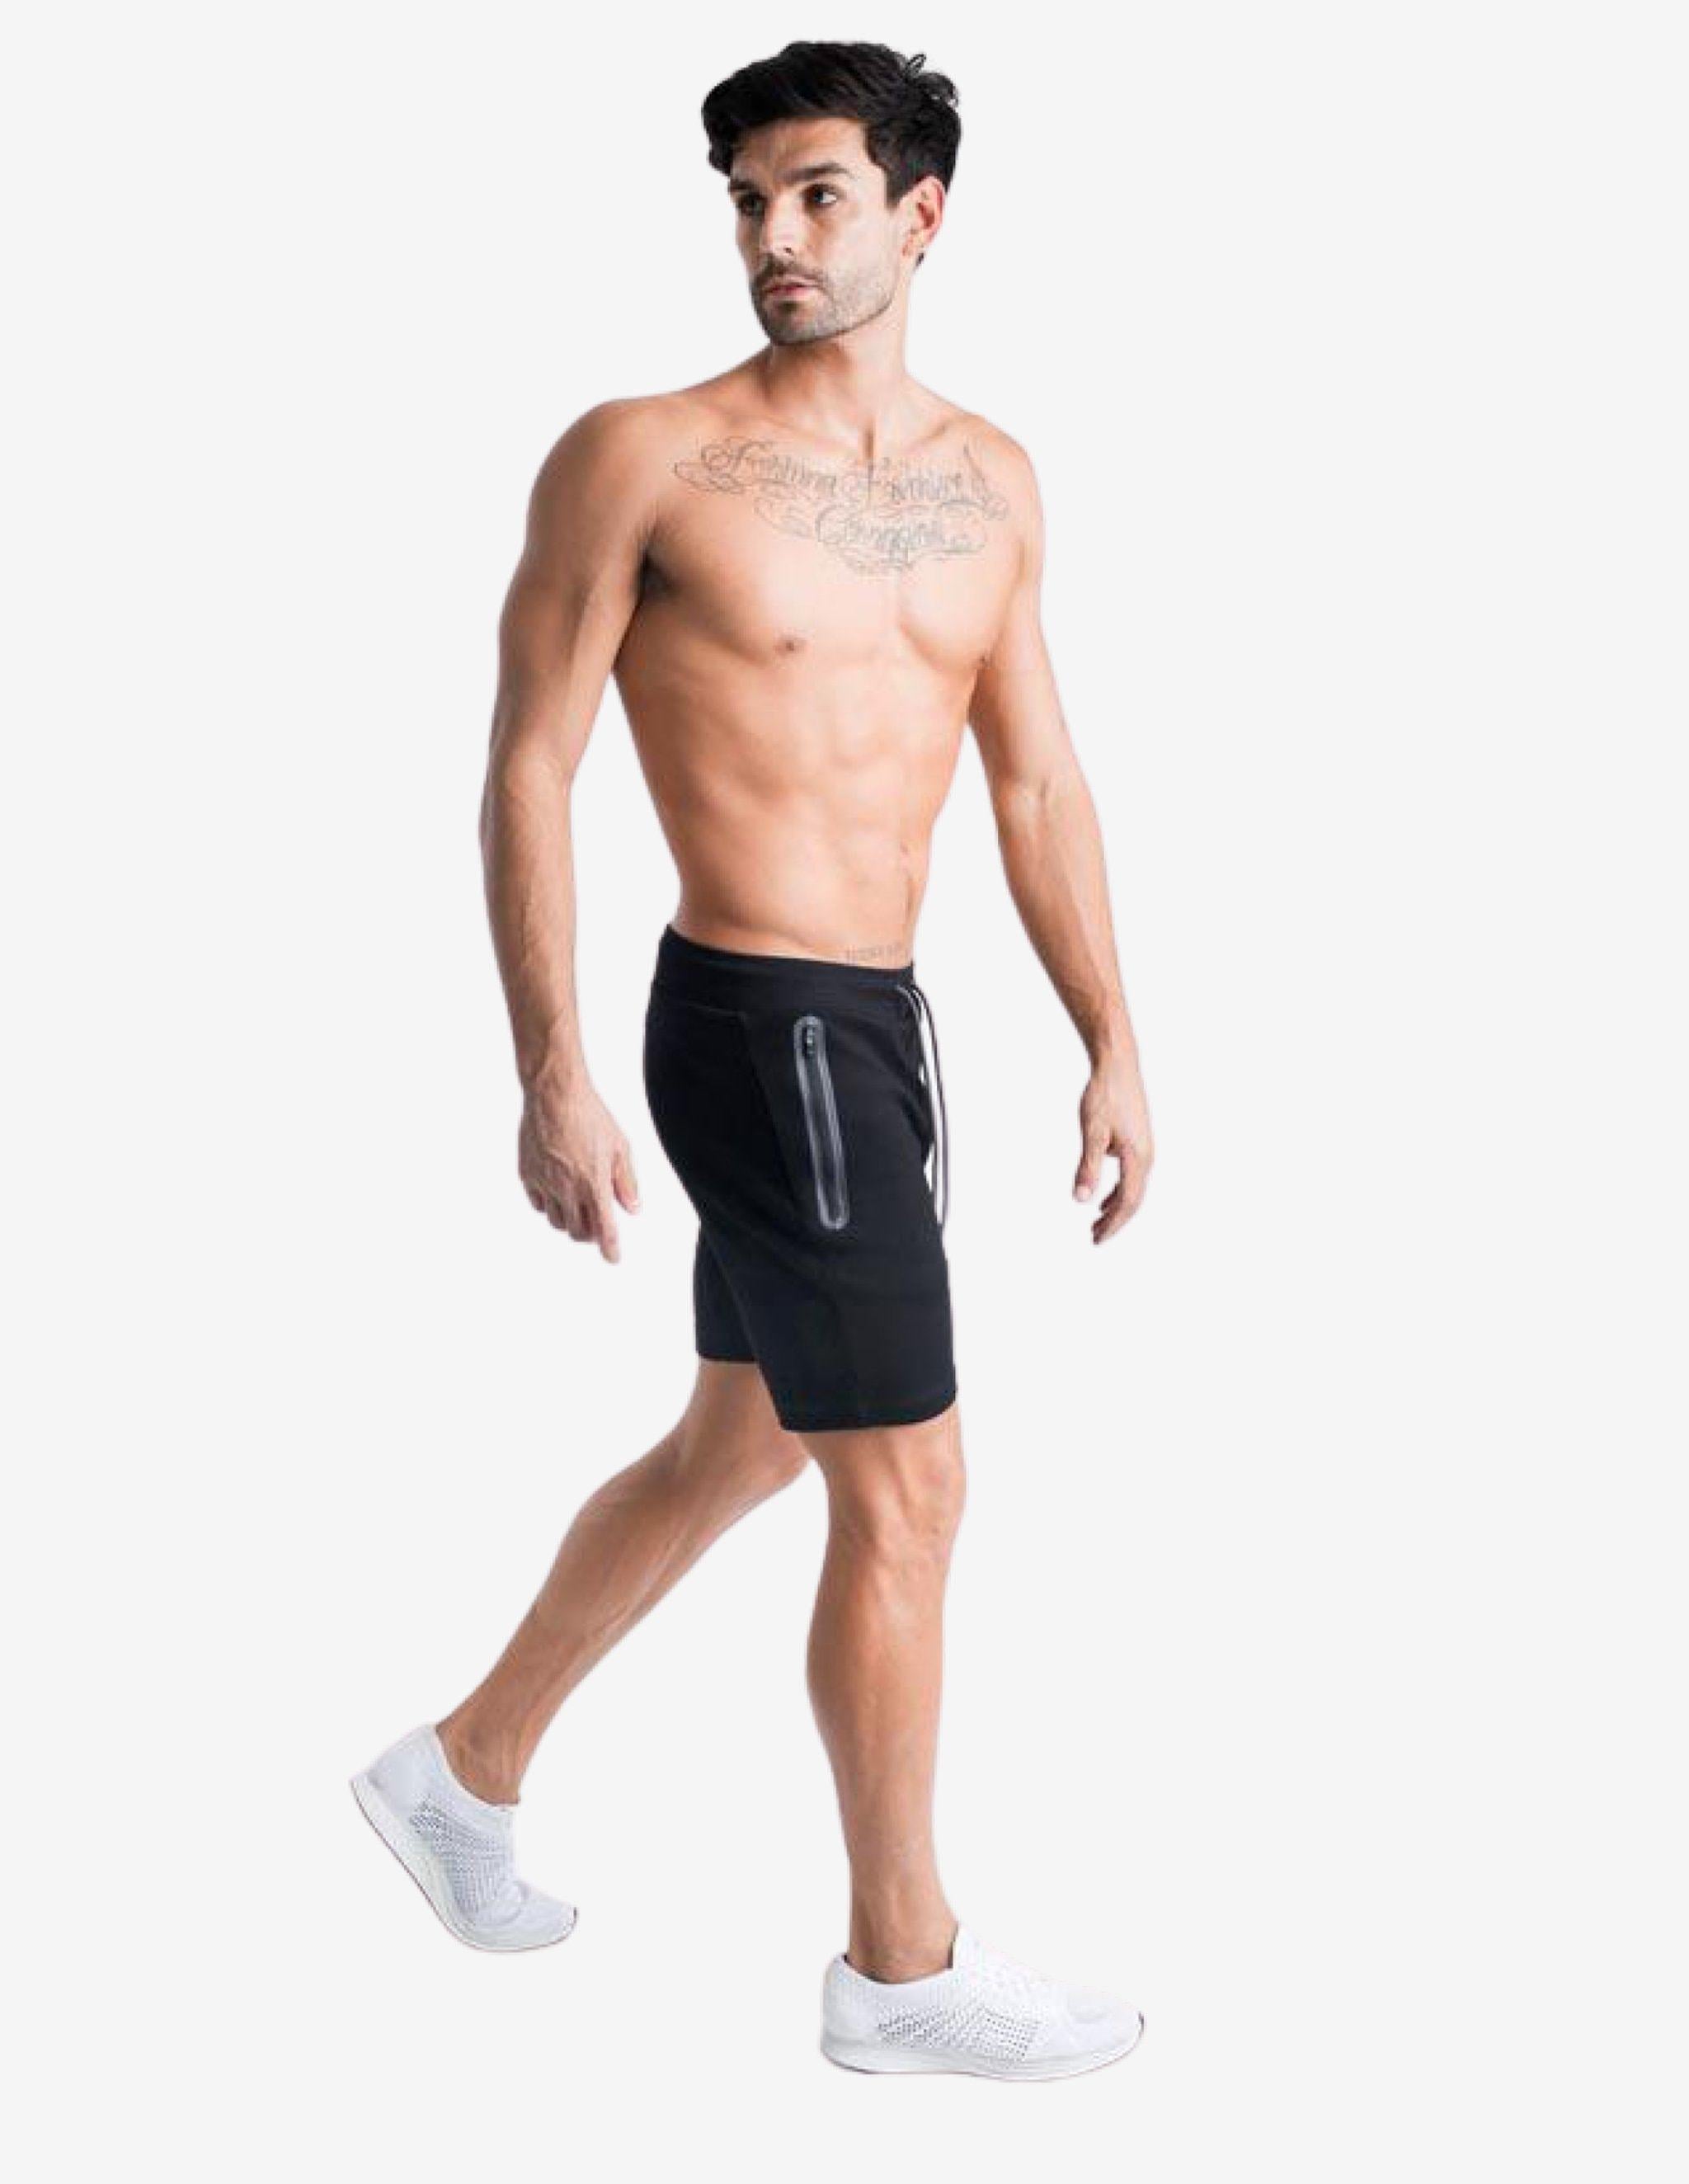 Imperial Fitted V2 Shorts - Stealth-Shorts Man-Biink Athleisure-Guru Muscle